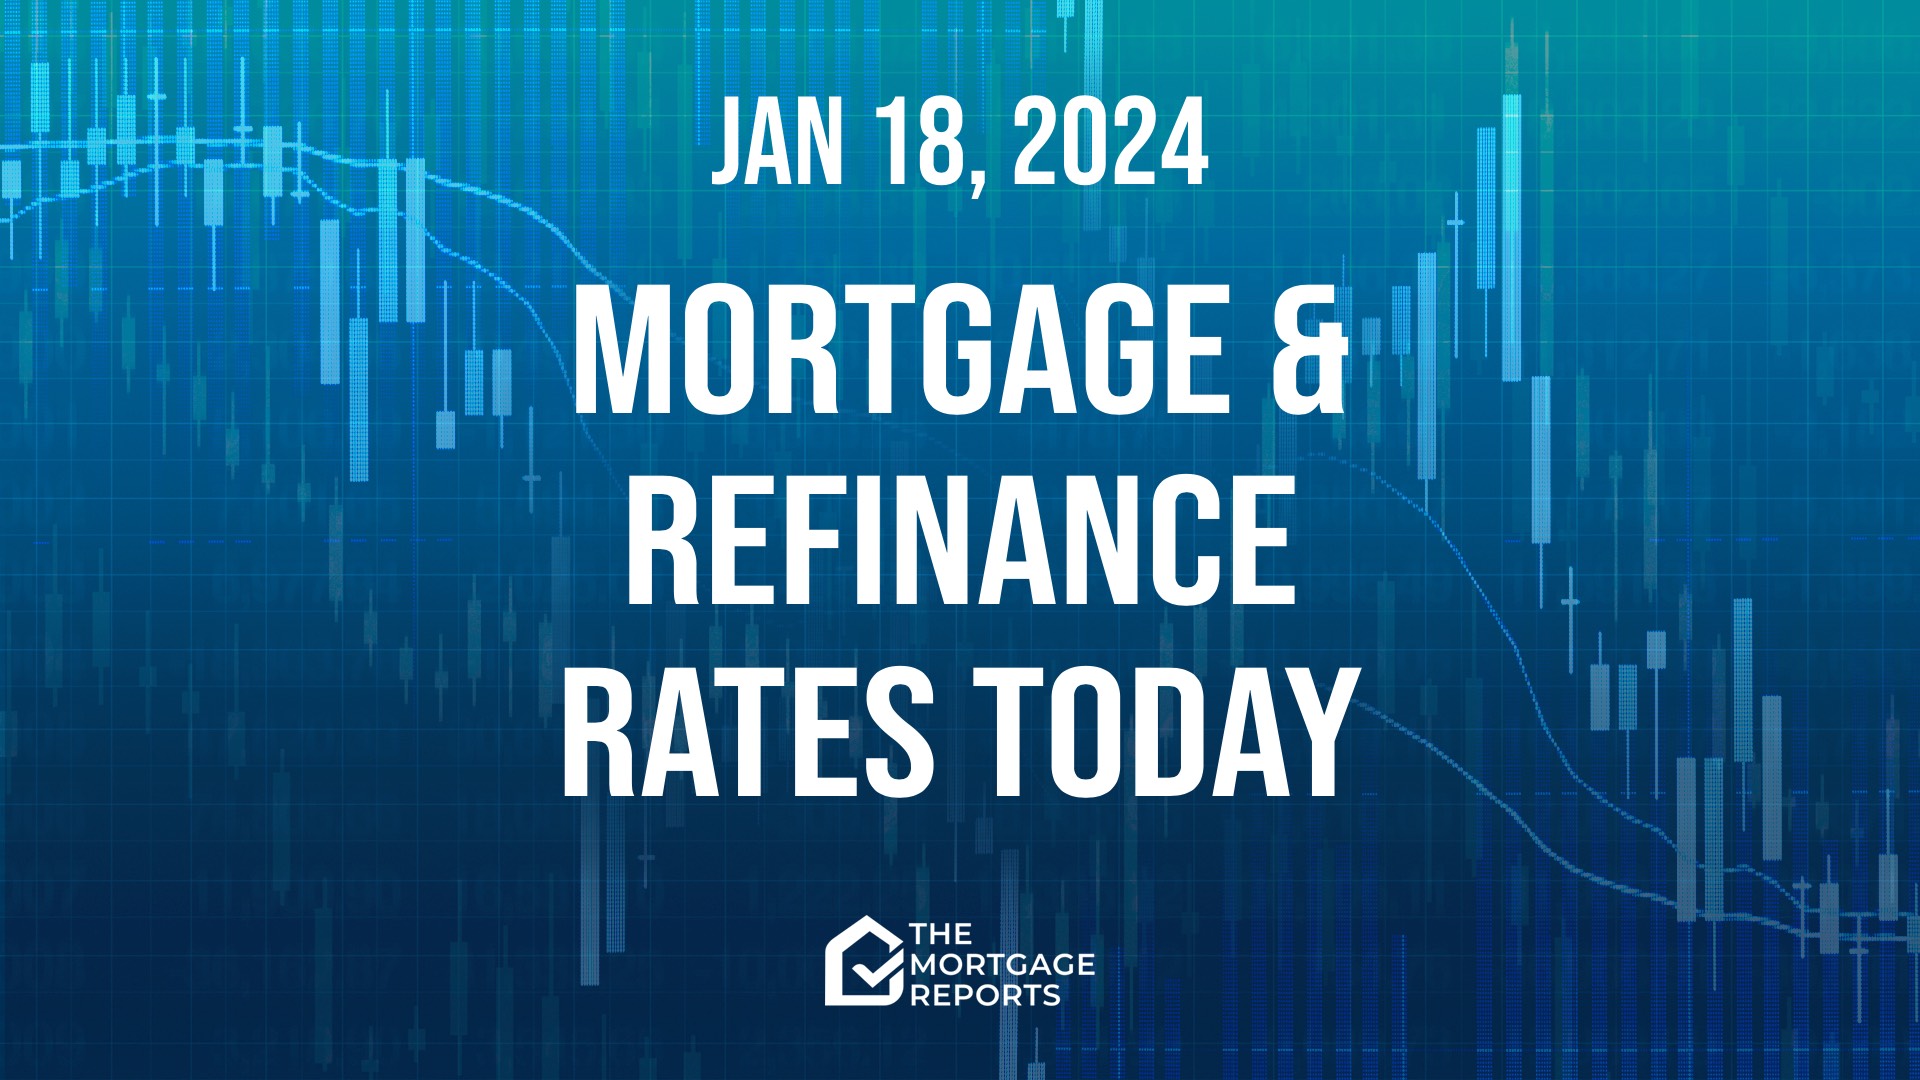 Mortgage rates today, Jan 18, 2024